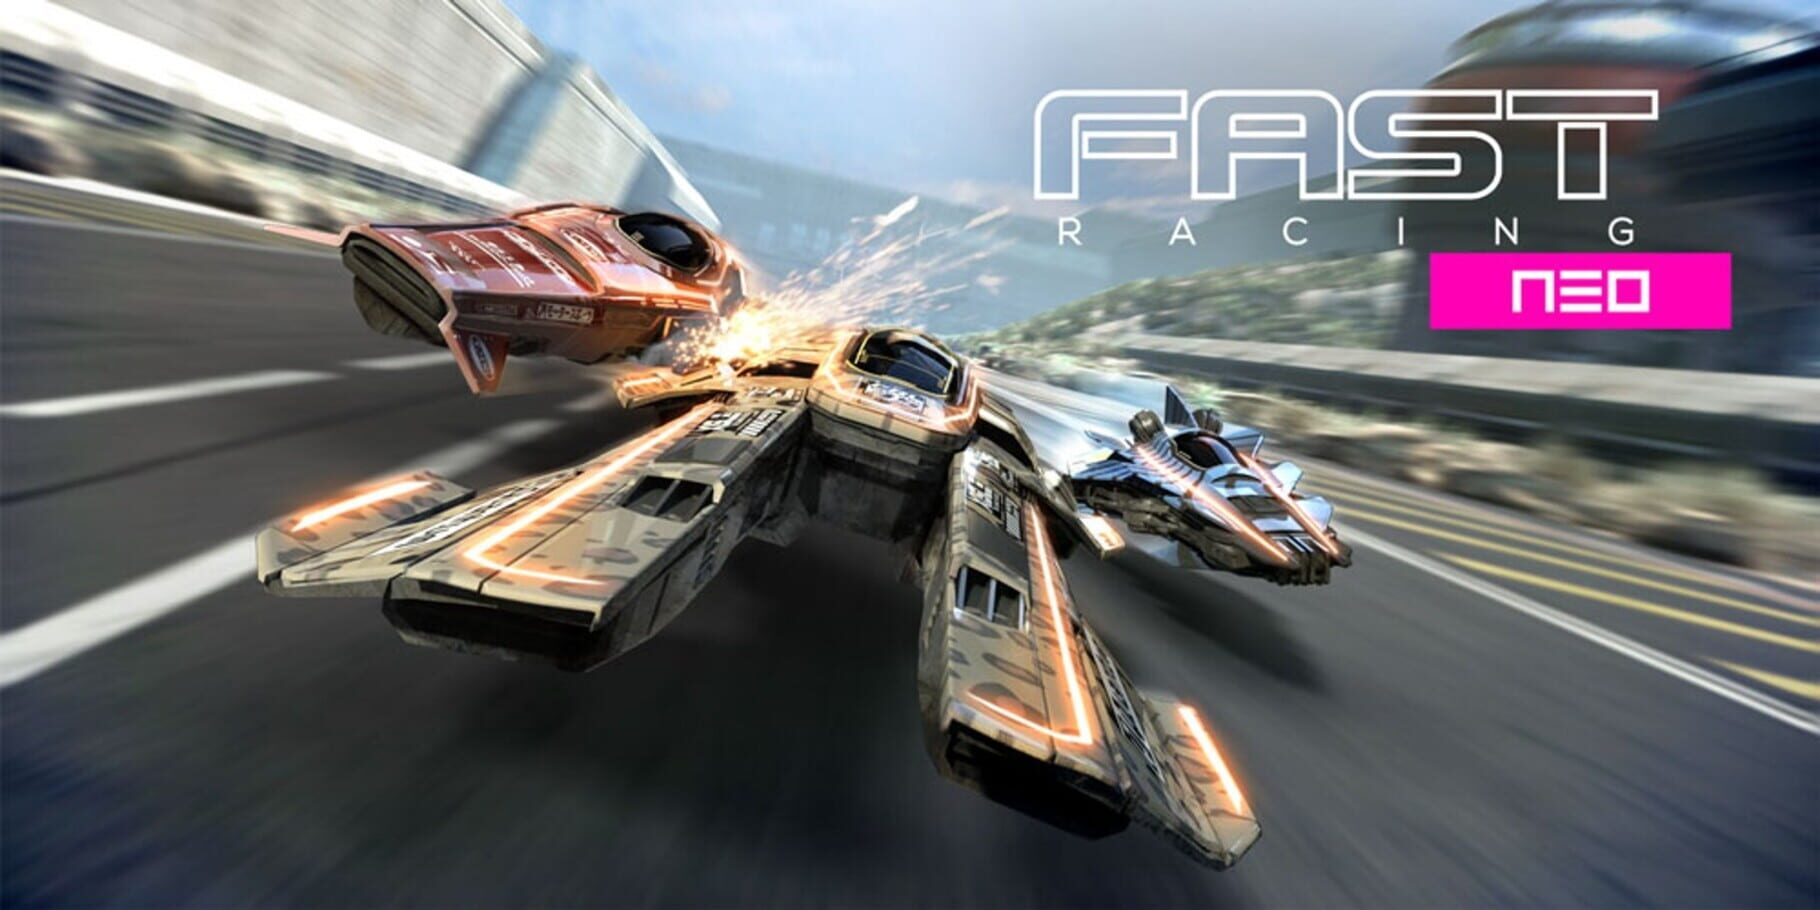 Artwork for Fast Racing Neo